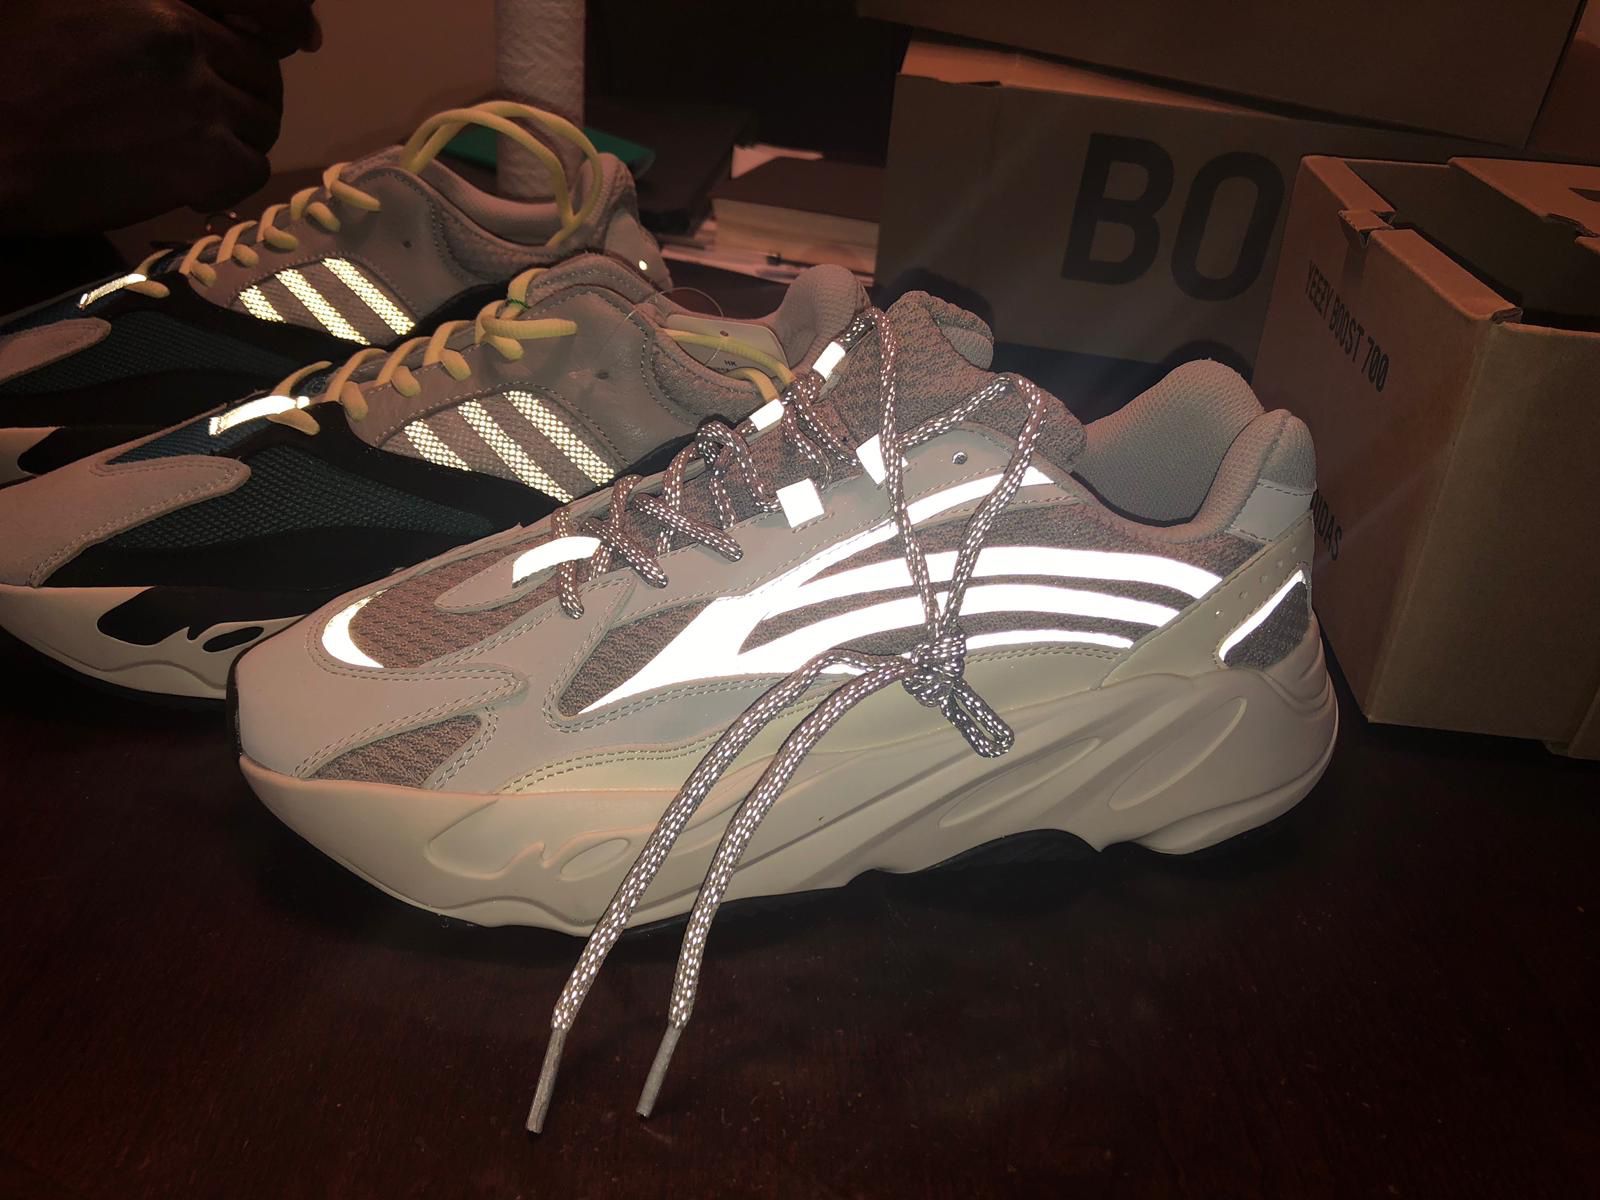 Adidas Yeezy Boost 700 for Sale in Hazel Crest, IL - OfferUp